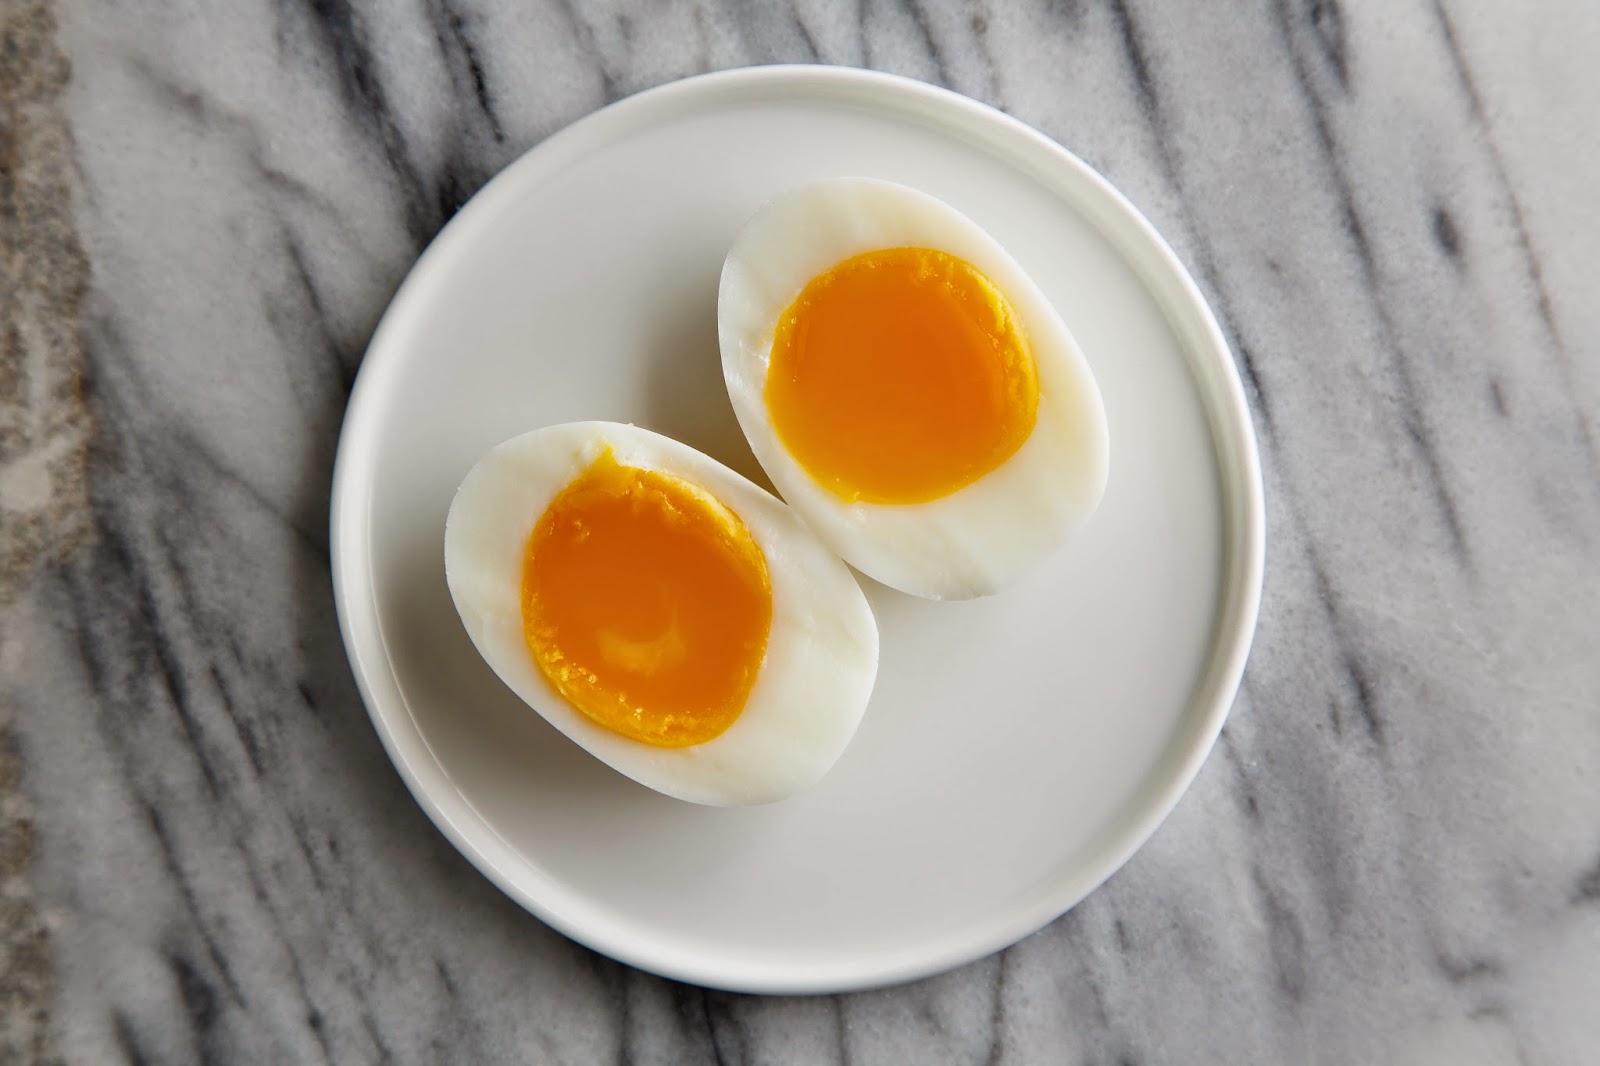 Hungry Cravings: How to Cut a Soft-Boiled Egg in Half